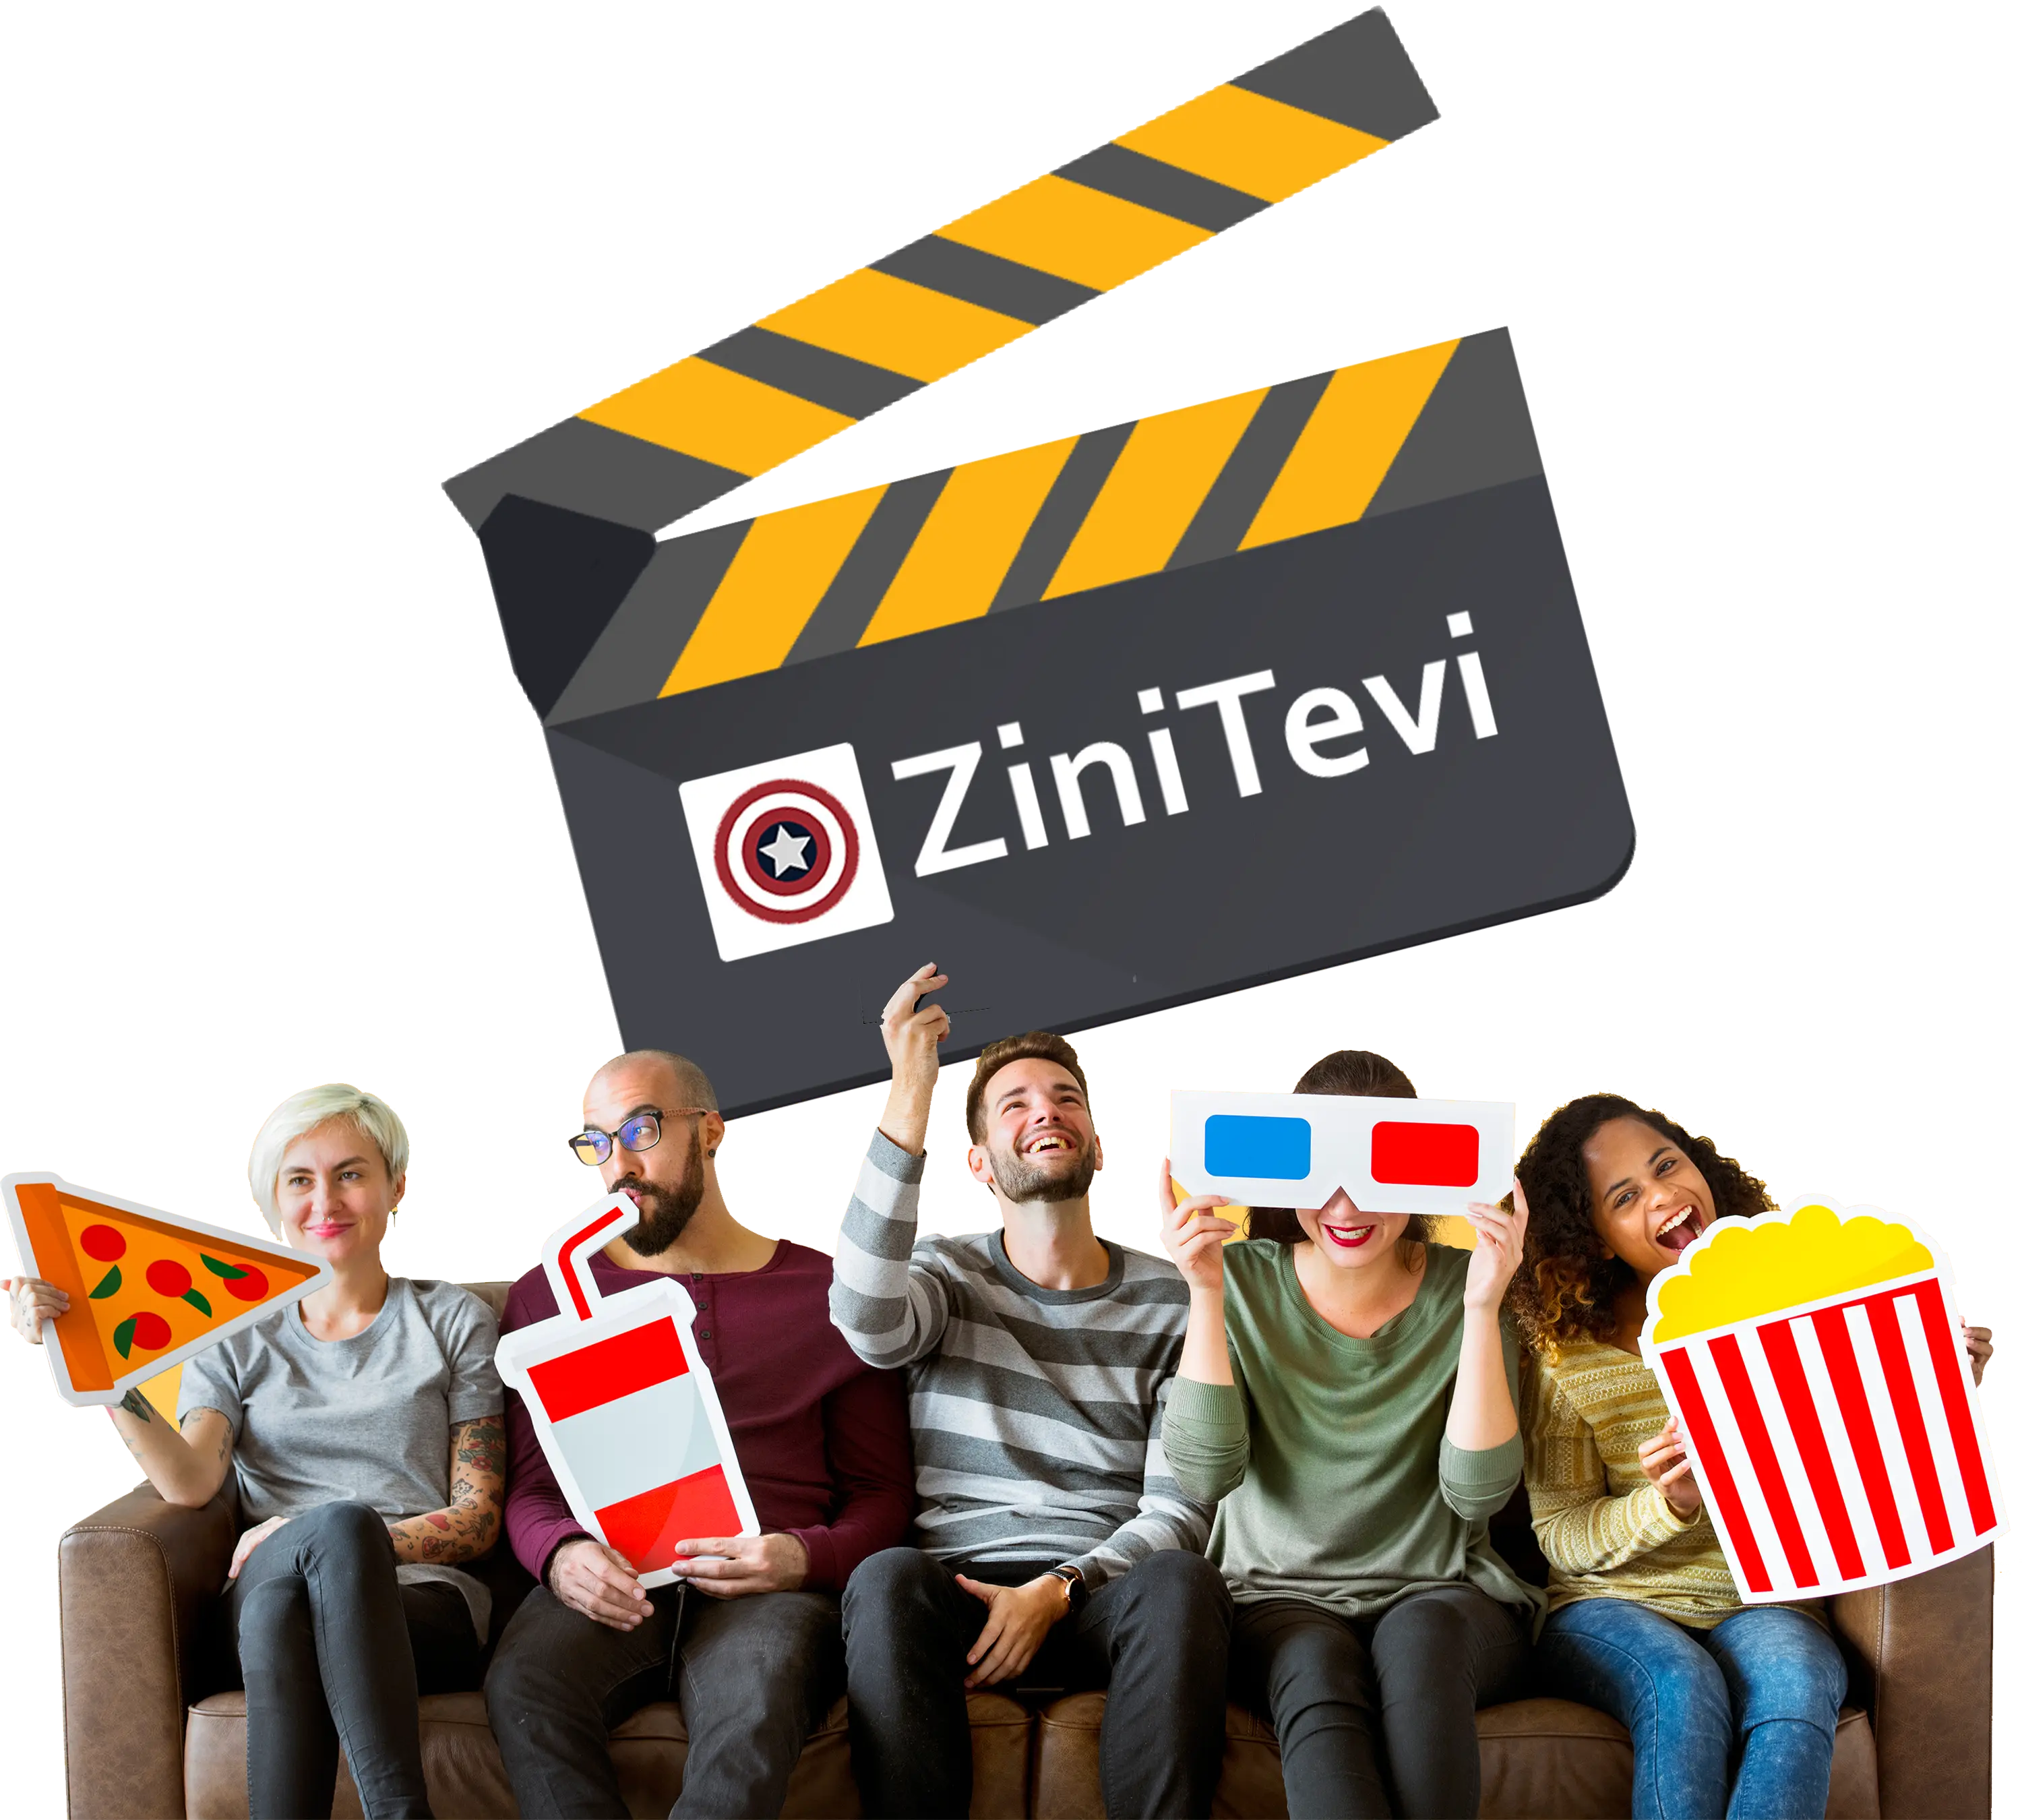 Download Latest Movies & TV Shows for Free with ZiniTevi